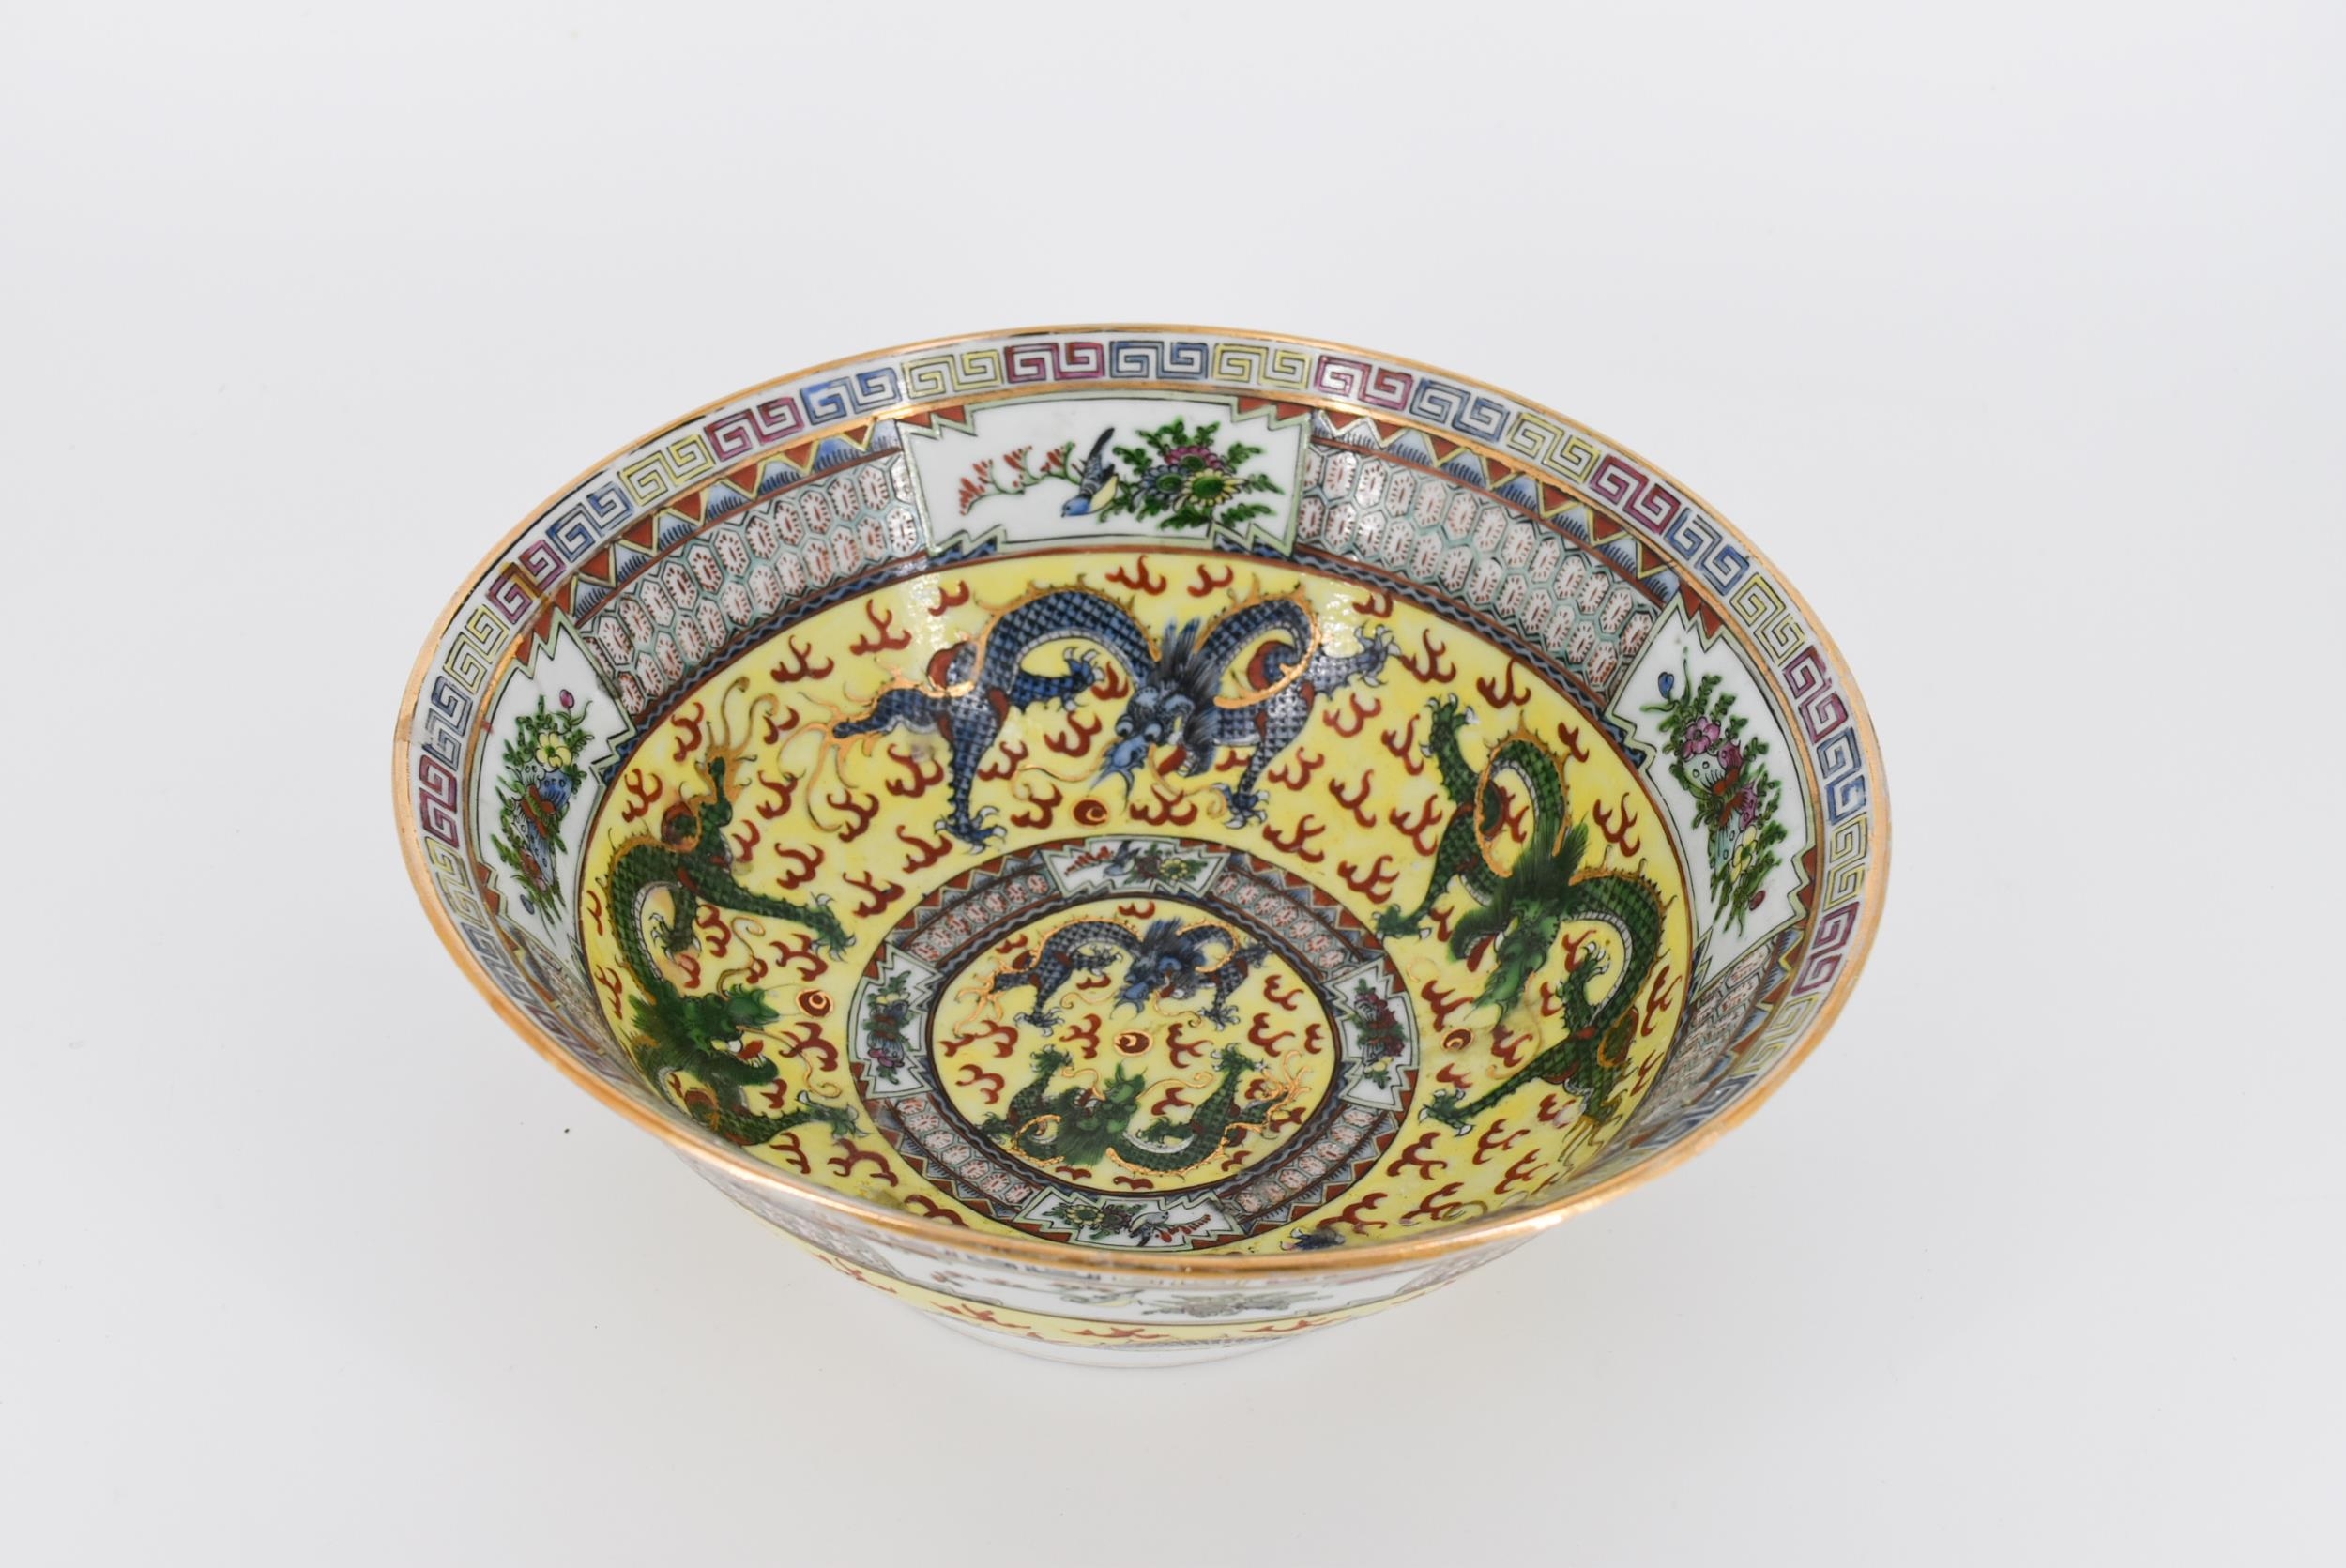 A 20th century Chinese porcelain bowl with dragon decoration along with a rose design and gilded - Image 3 of 7